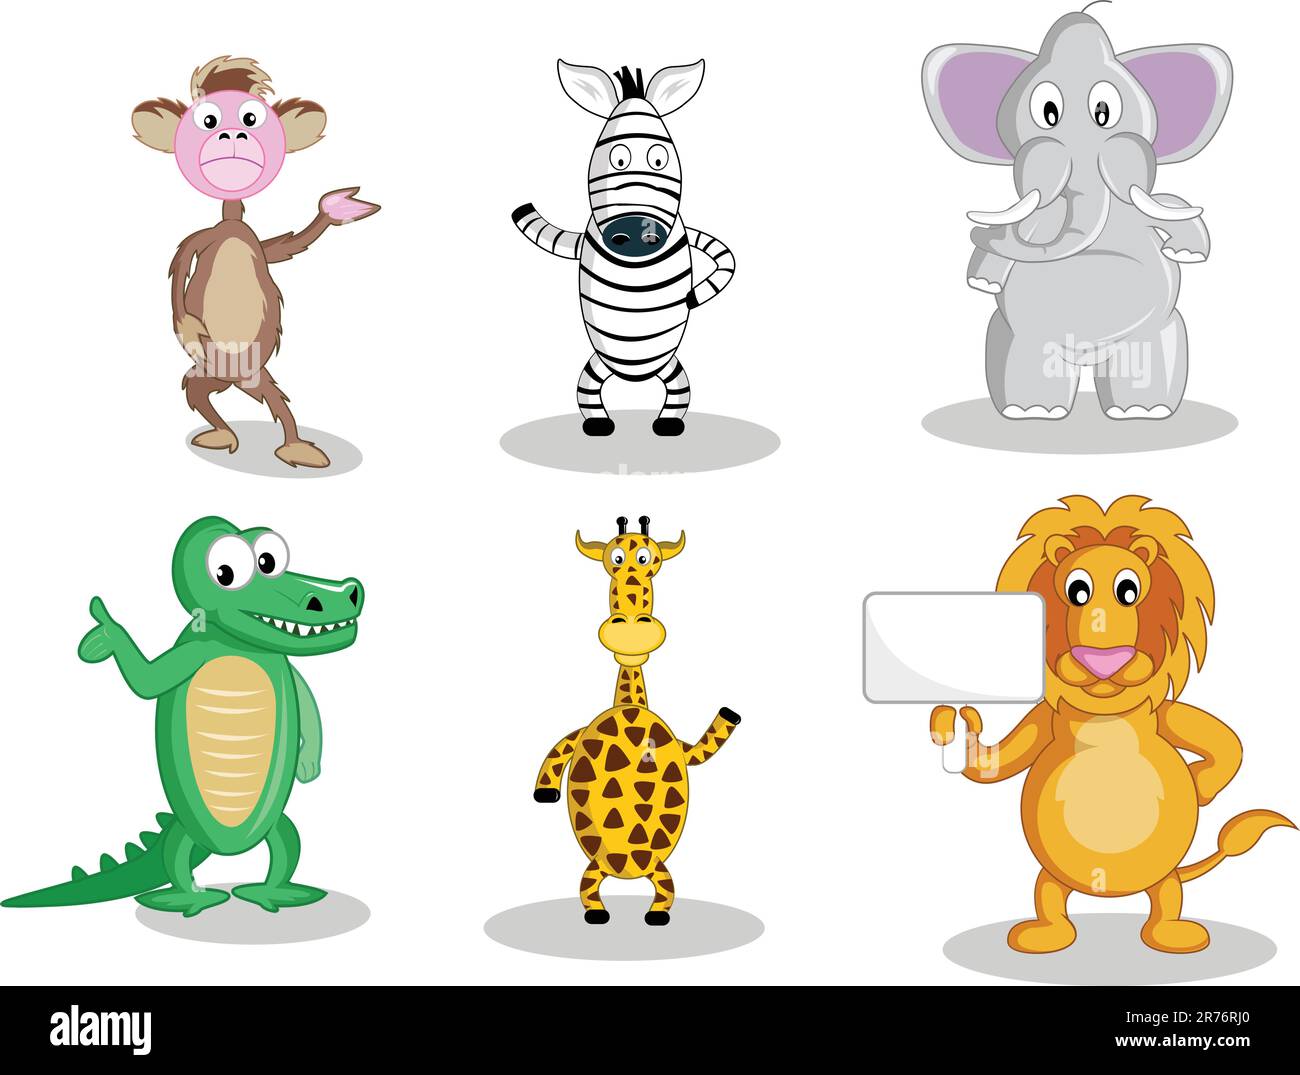 A monkey and a zebra waving their hand, a fat elephant, smiling intelligent gator, waving giraffe and a lion holding a sign, all in vector illustra... Stock Vector